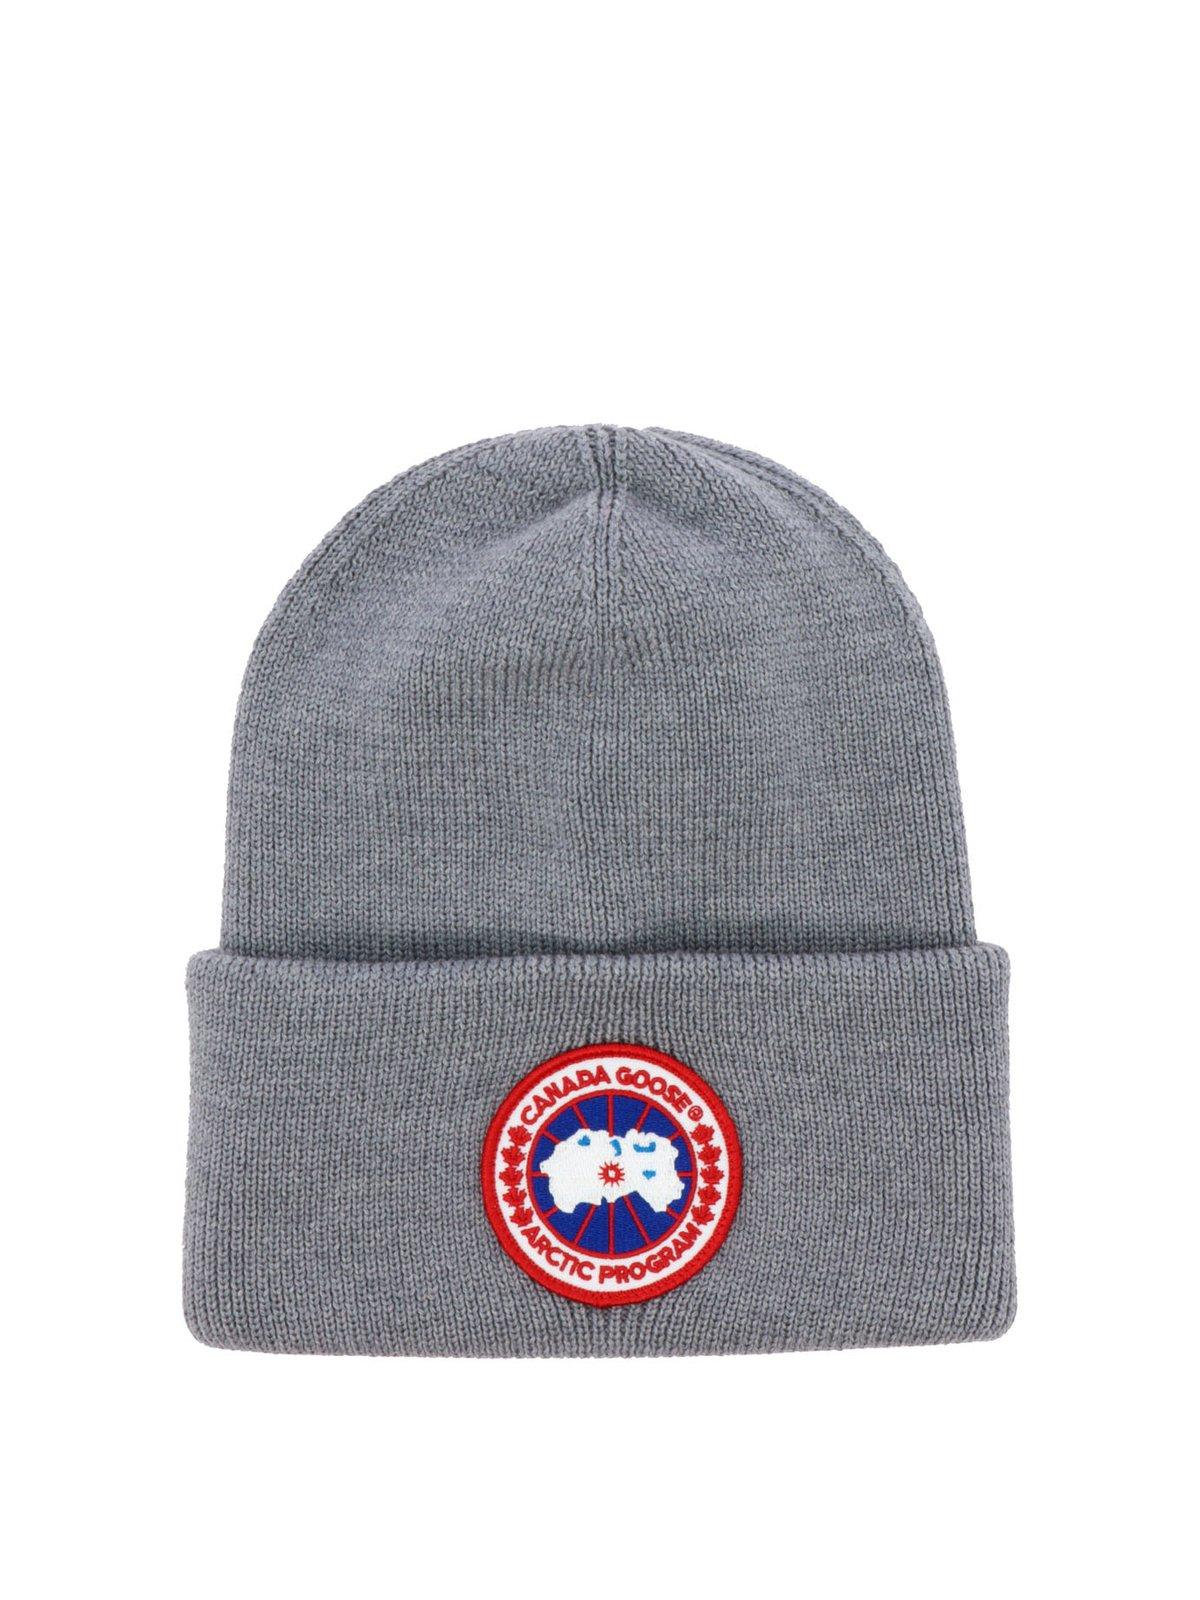 Canada Goose Logo Embroidered Beanie